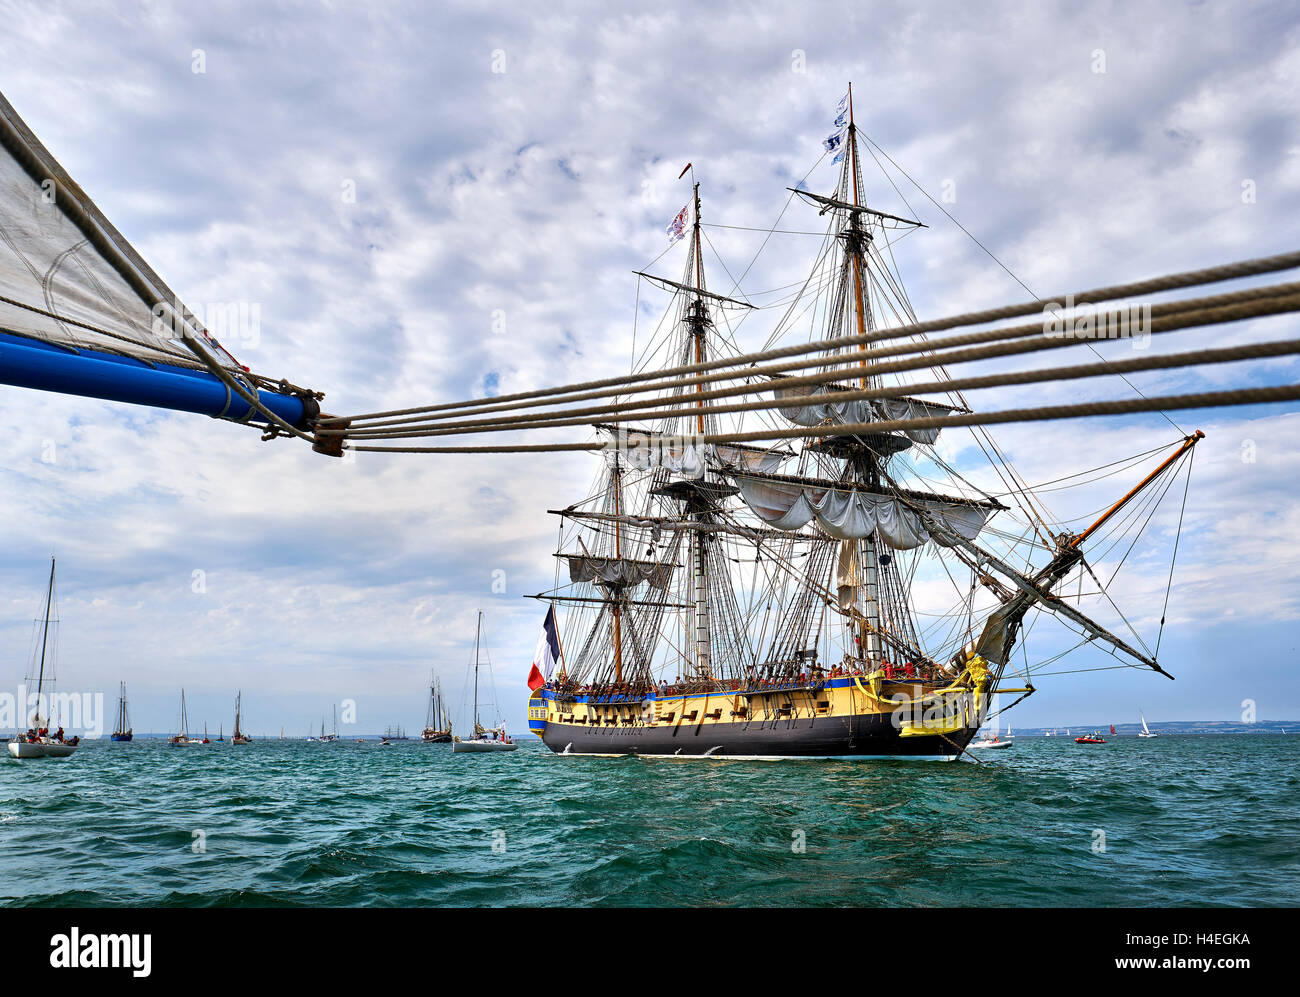 France, Finistere, Brittany, Brest, Fetes Maritimes 2016, the french navy frigate L'hermione. Stock Photo